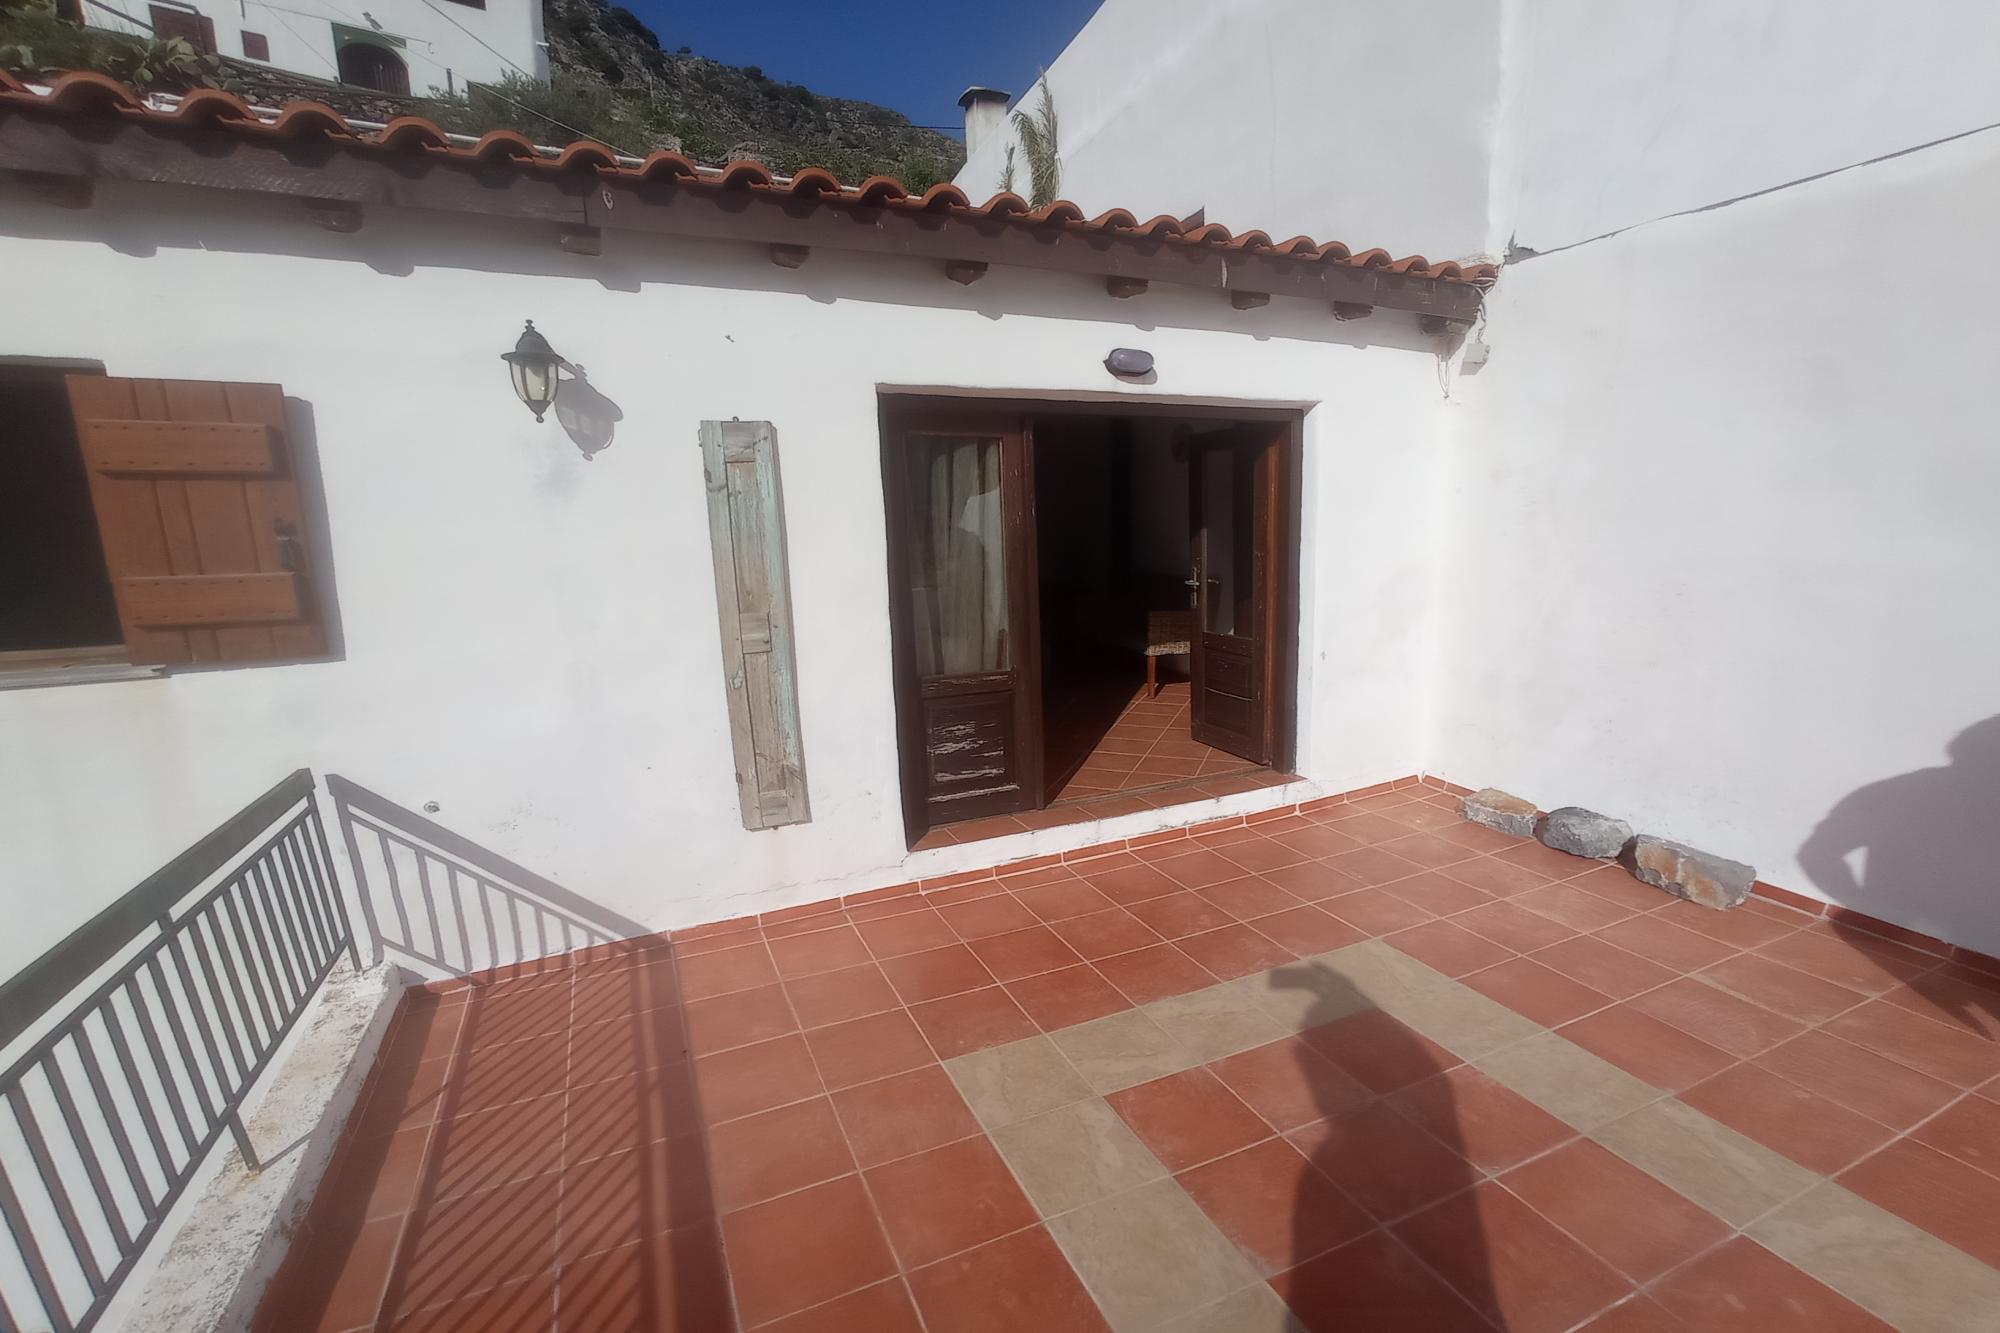 2 bedroom village stone house with large terraces and mountain views.